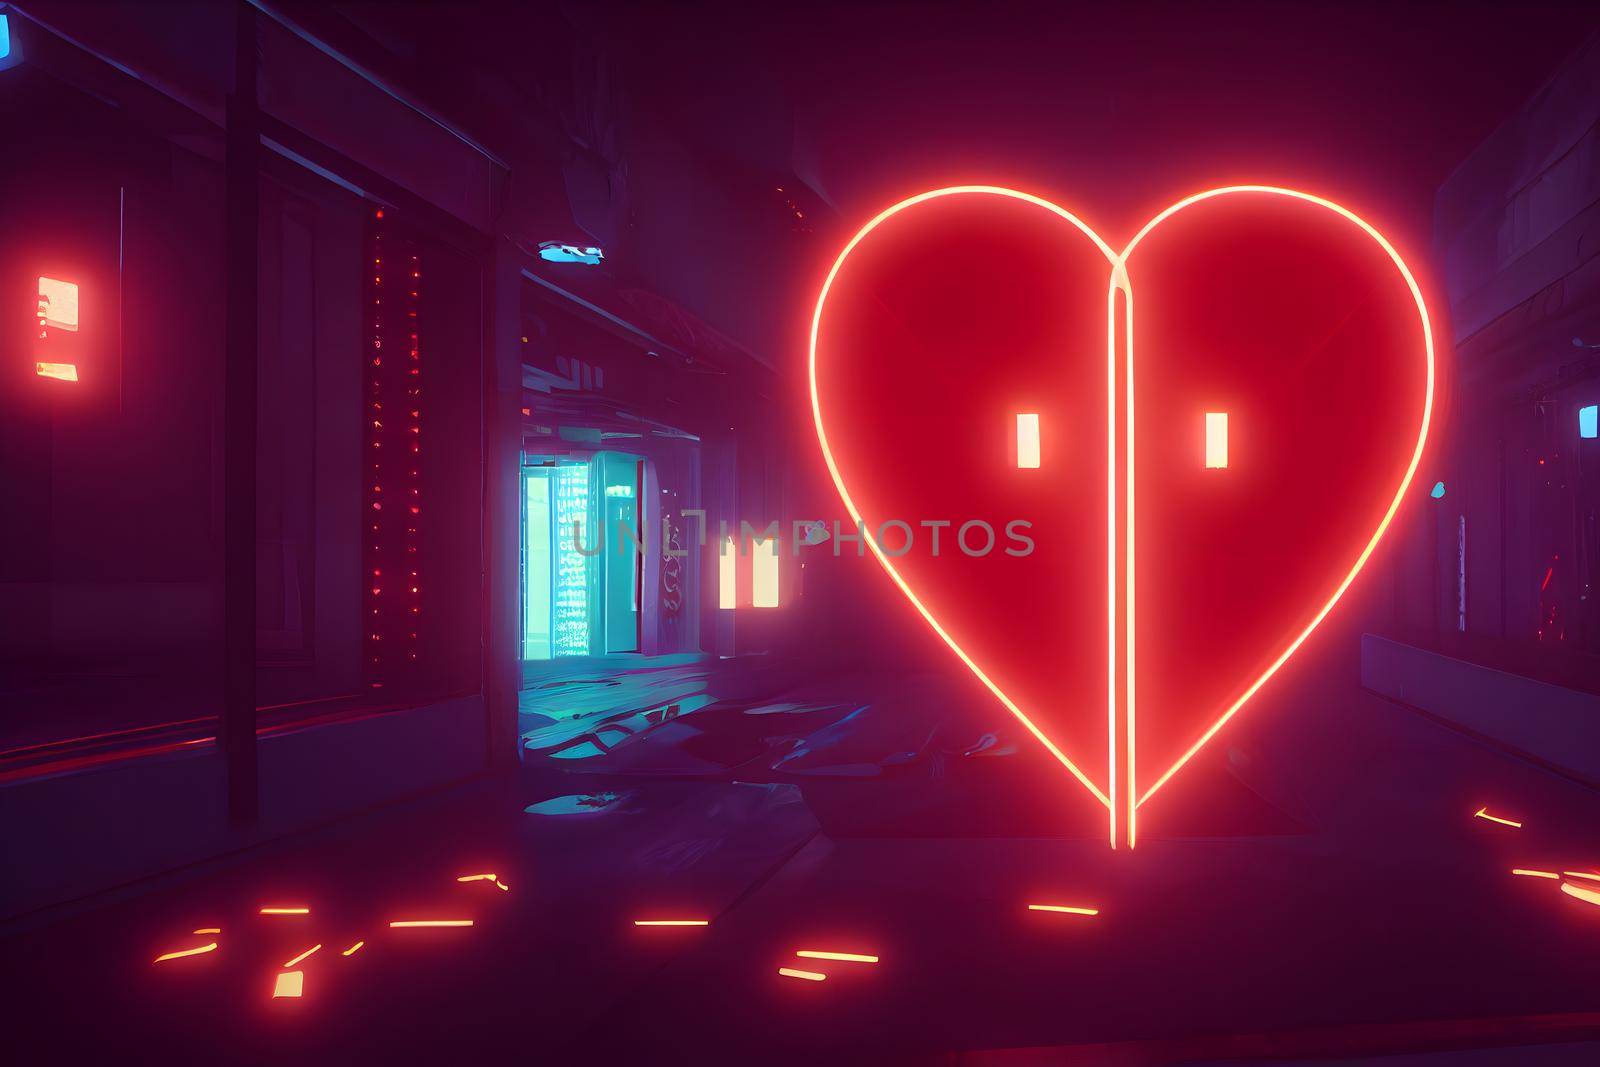 large red glowing heart on the wall in night club with dim lights, neural network generated art. Digitally generated image. Not based on any actual scene or pattern.